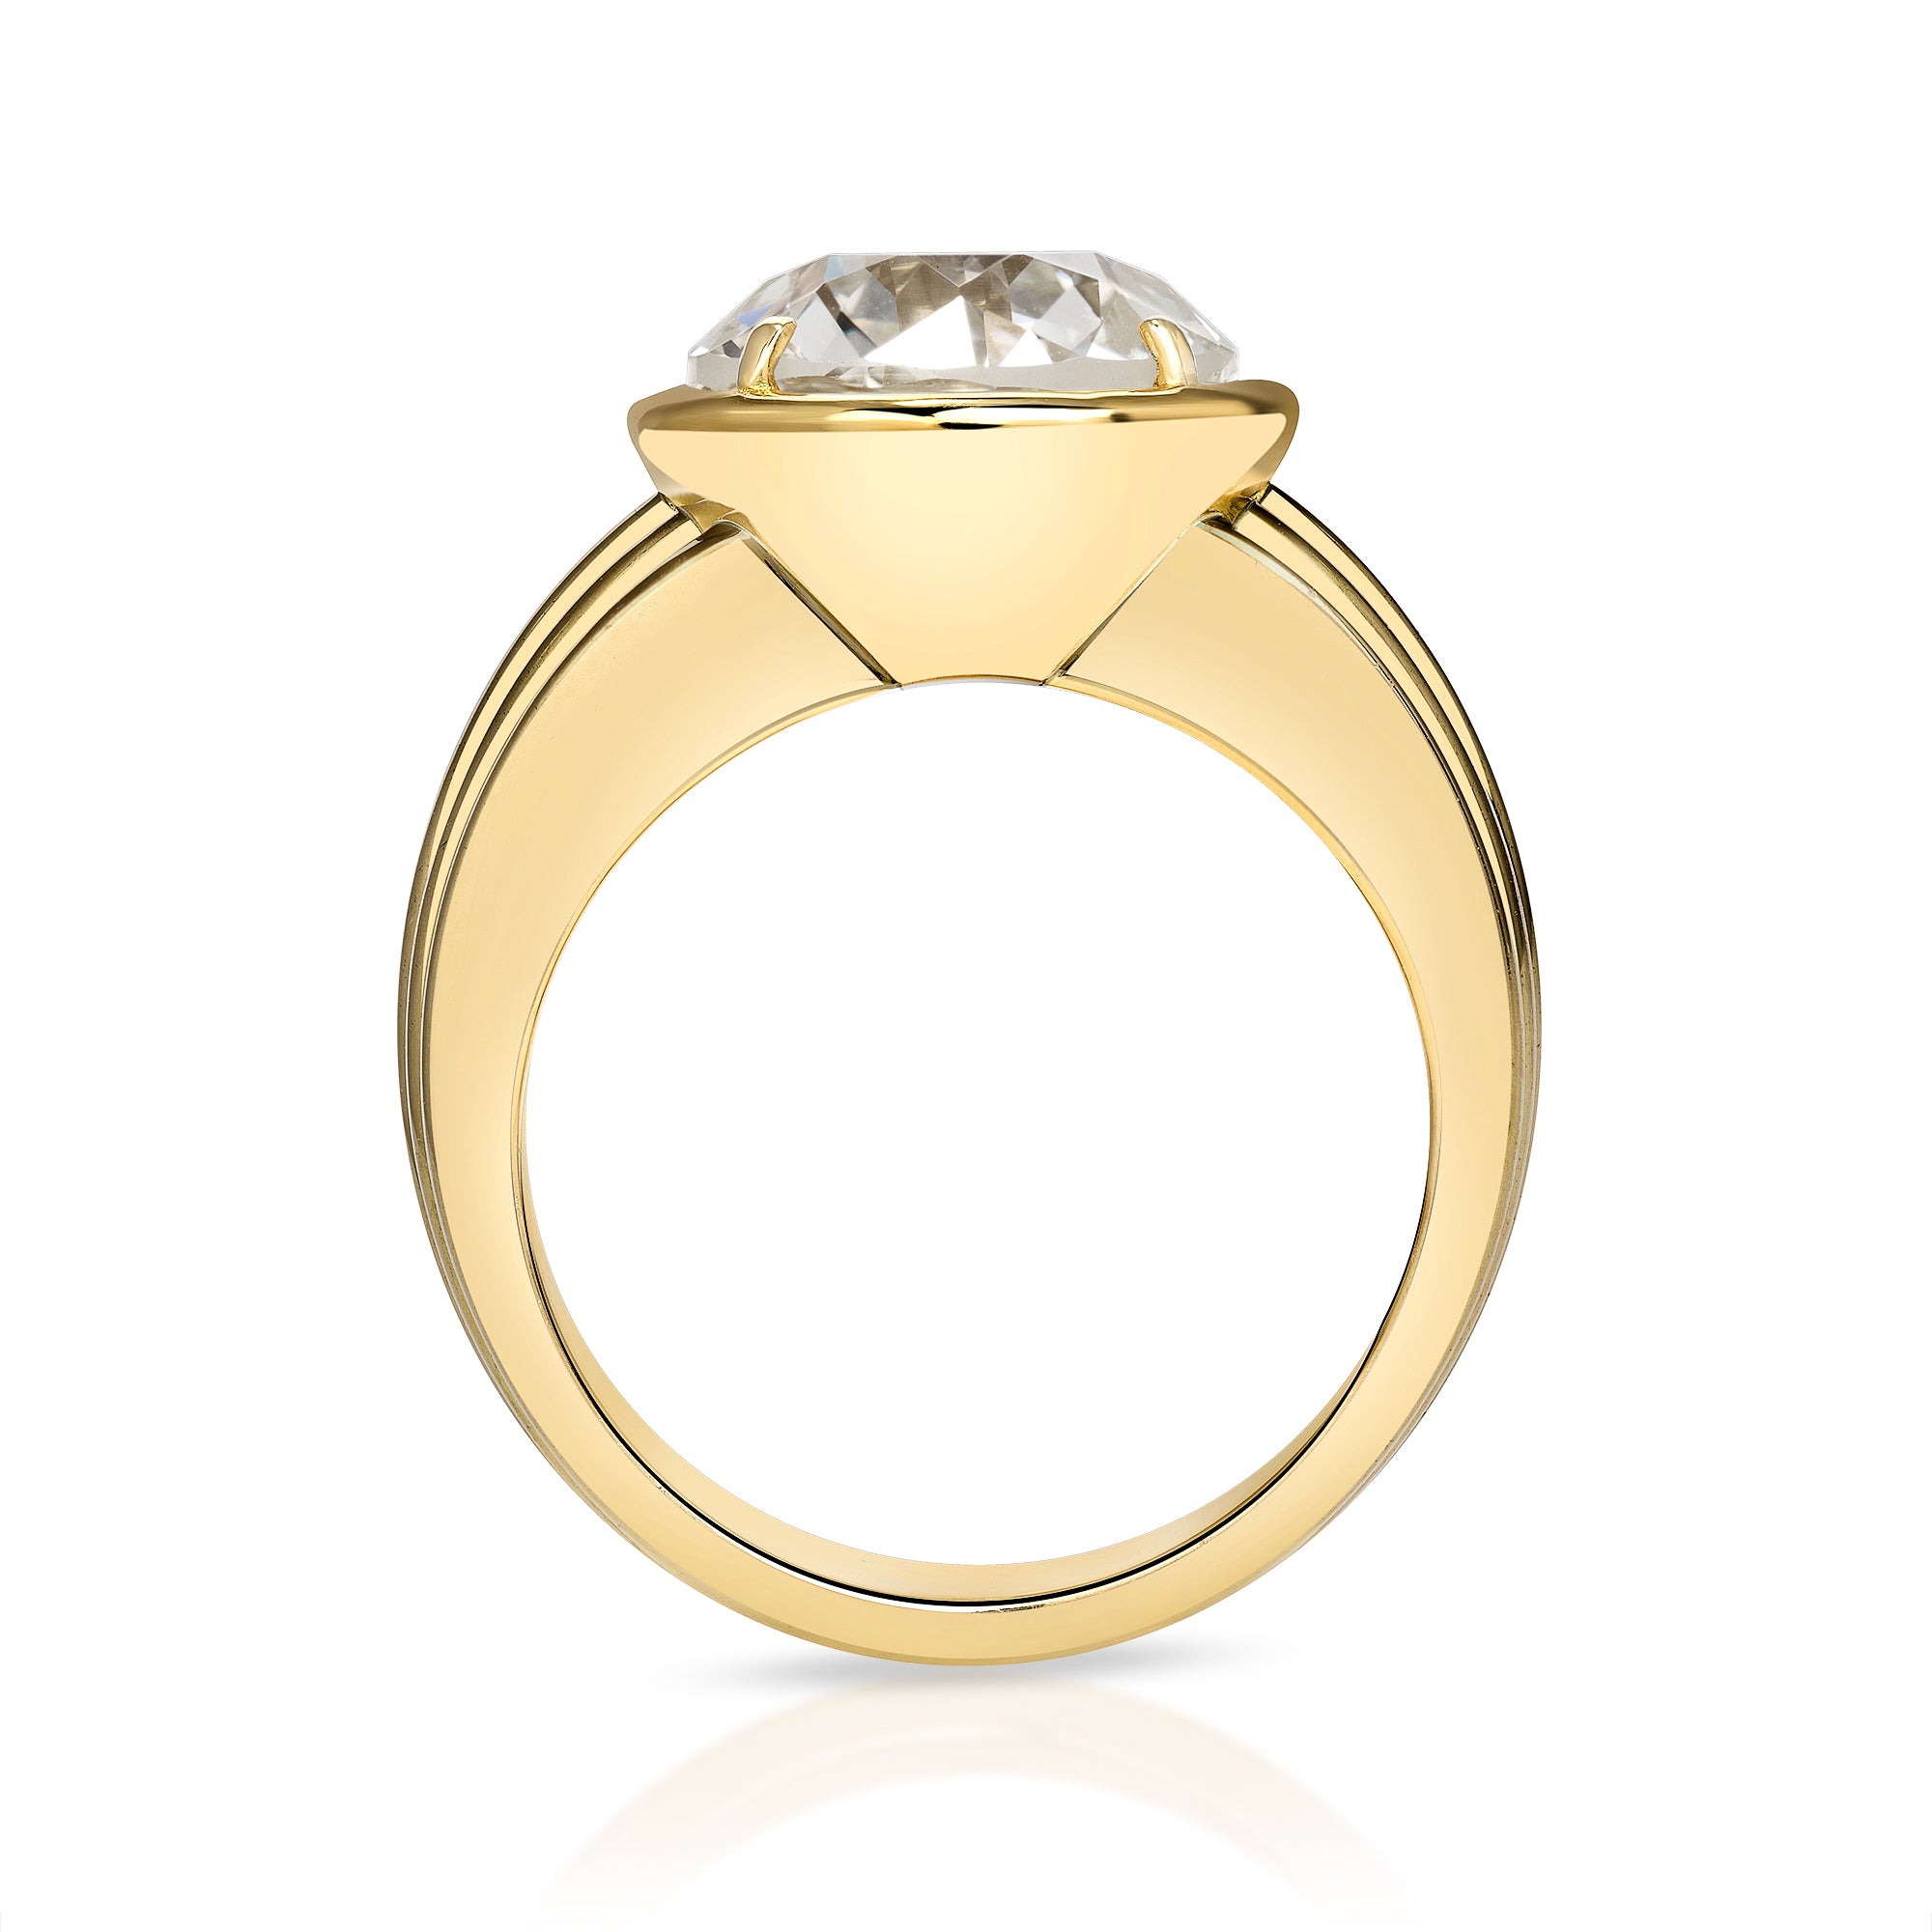 SINGLE STONE ELENI RING featuring 5.01ct L/VS1 GIA certified old European cut diamond bezel set in a handcrafted 18K yellow gold mounting.